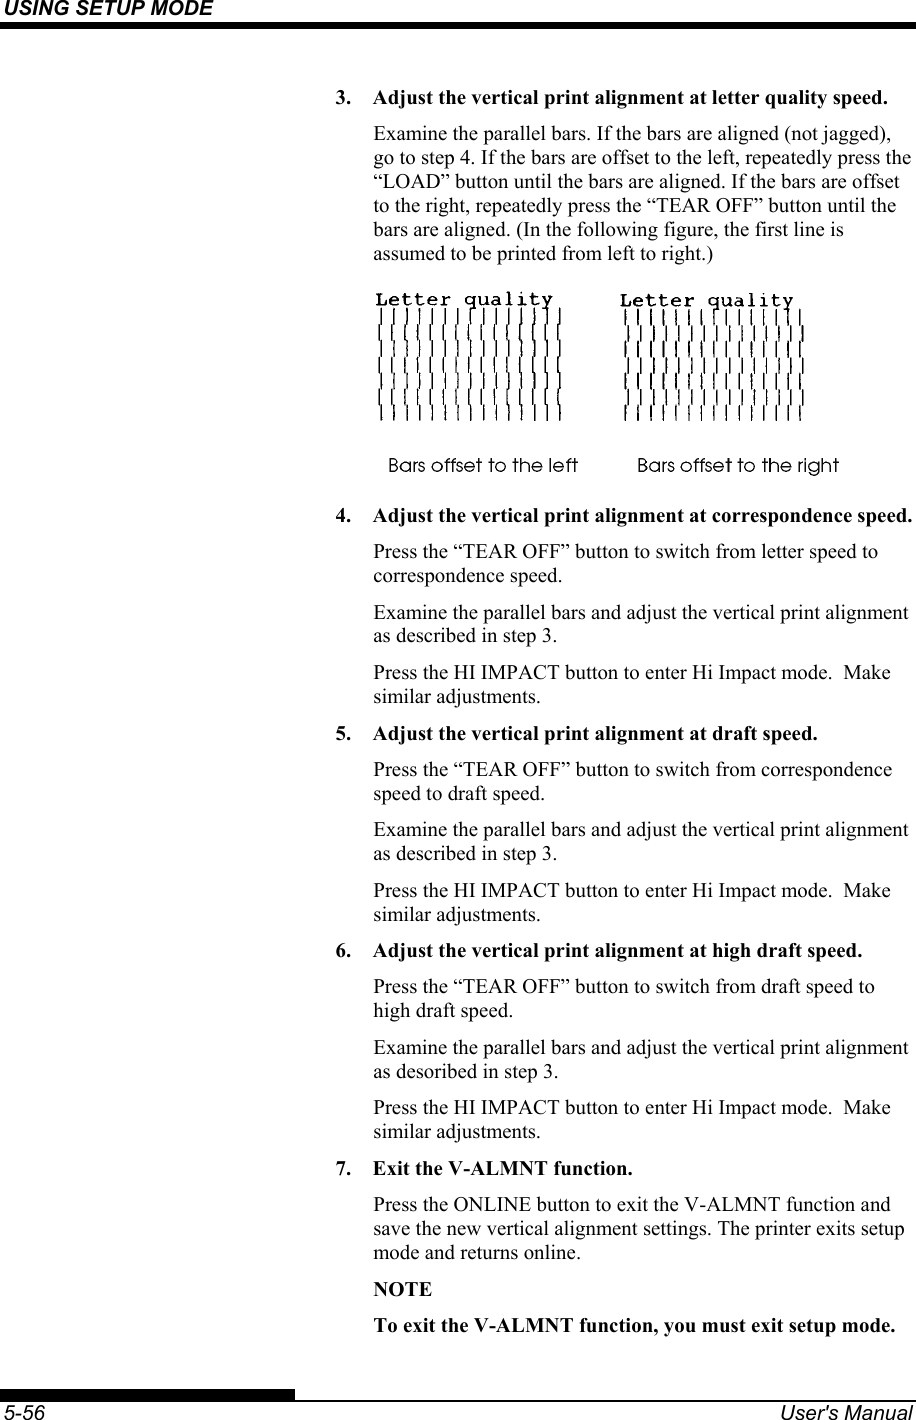 USING SETUP MODE    5-56  User&apos;s Manual 3.  Adjust the vertical print alignment at letter quality speed. Examine the parallel bars. If the bars are aligned (not jagged), go to step 4. If the bars are offset to the left, repeatedly press the “LOAD” button until the bars are aligned. If the bars are offset to the right, repeatedly press the “TEAR OFF” button until the bars are aligned. (In the following figure, the first line is assumed to be printed from left to right.)  4.  Adjust the vertical print alignment at correspondence speed. Press the “TEAR OFF” button to switch from letter speed to correspondence speed. Examine the parallel bars and adjust the vertical print alignment as described in step 3. Press the HI IMPACT button to enter Hi Impact mode.  Make similar adjustments. 5.  Adjust the vertical print alignment at draft speed. Press the “TEAR OFF” button to switch from correspondence speed to draft speed. Examine the parallel bars and adjust the vertical print alignment as described in step 3. Press the HI IMPACT button to enter Hi Impact mode.  Make similar adjustments. 6.  Adjust the vertical print alignment at high draft speed. Press the “TEAR OFF” button to switch from draft speed to high draft speed. Examine the parallel bars and adjust the vertical print alignment as desoribed in step 3. Press the HI IMPACT button to enter Hi Impact mode.  Make similar adjustments. 7.  Exit the V-ALMNT function. Press the ONLINE button to exit the V-ALMNT function and save the new vertical alignment settings. The printer exits setup mode and returns online. NOTE To exit the V-ALMNT function, you must exit setup mode. 